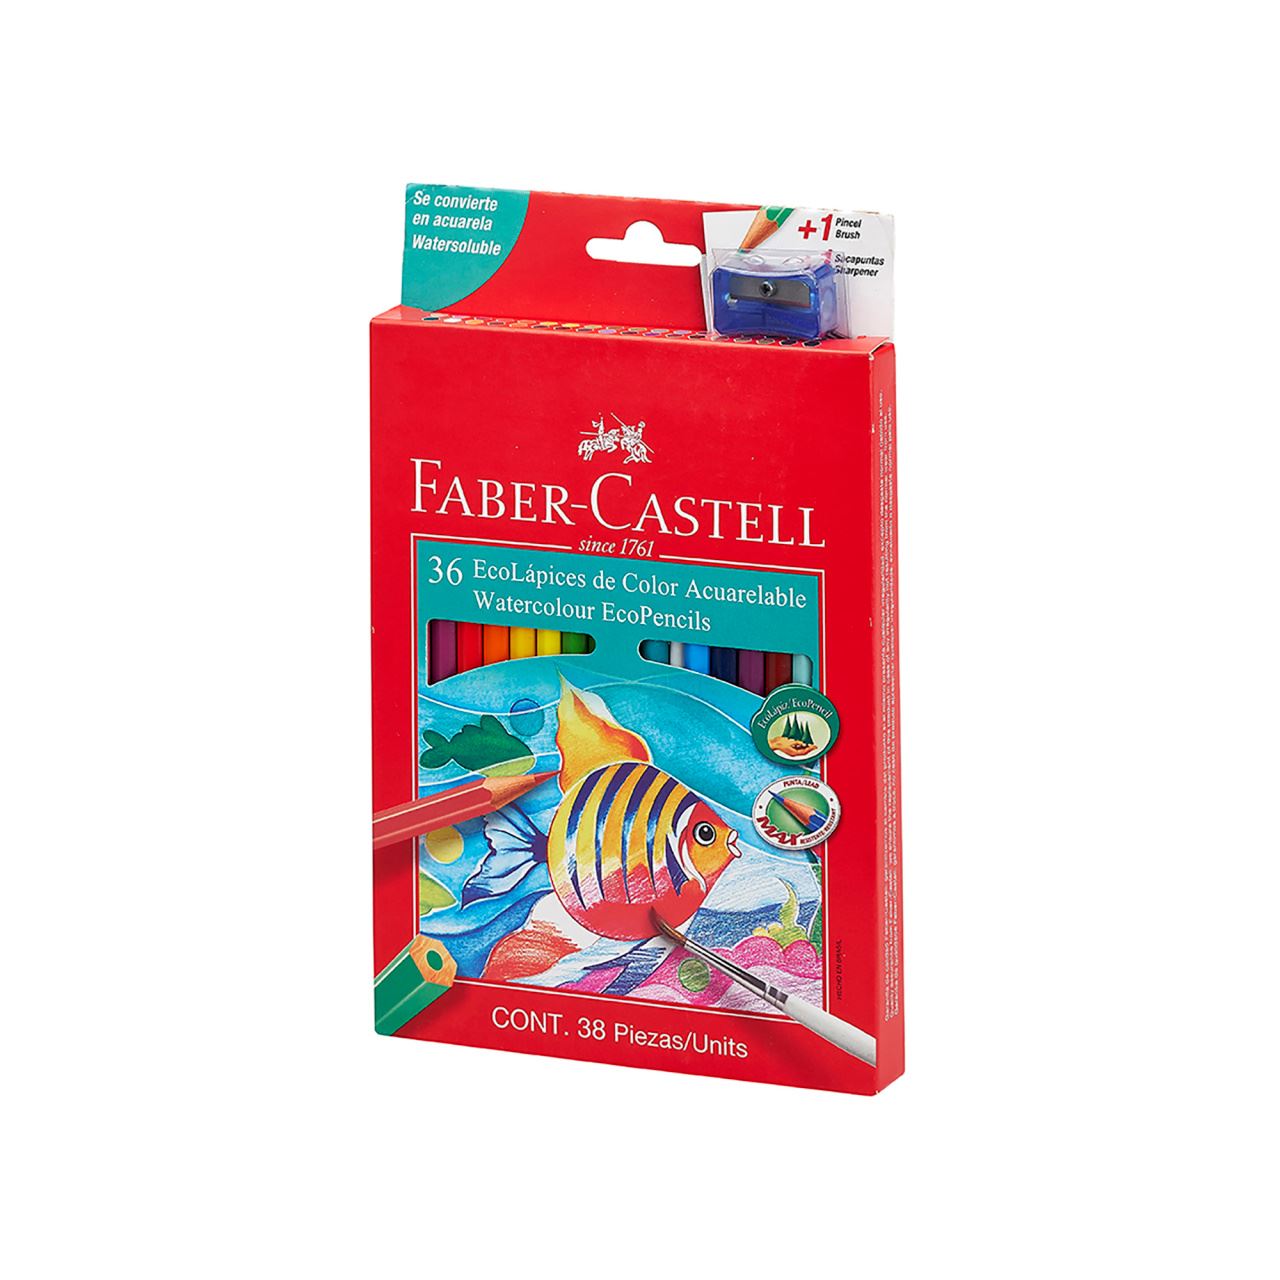 Faber-Castell - Water soluble ecop 120236EXP 36x w/sh